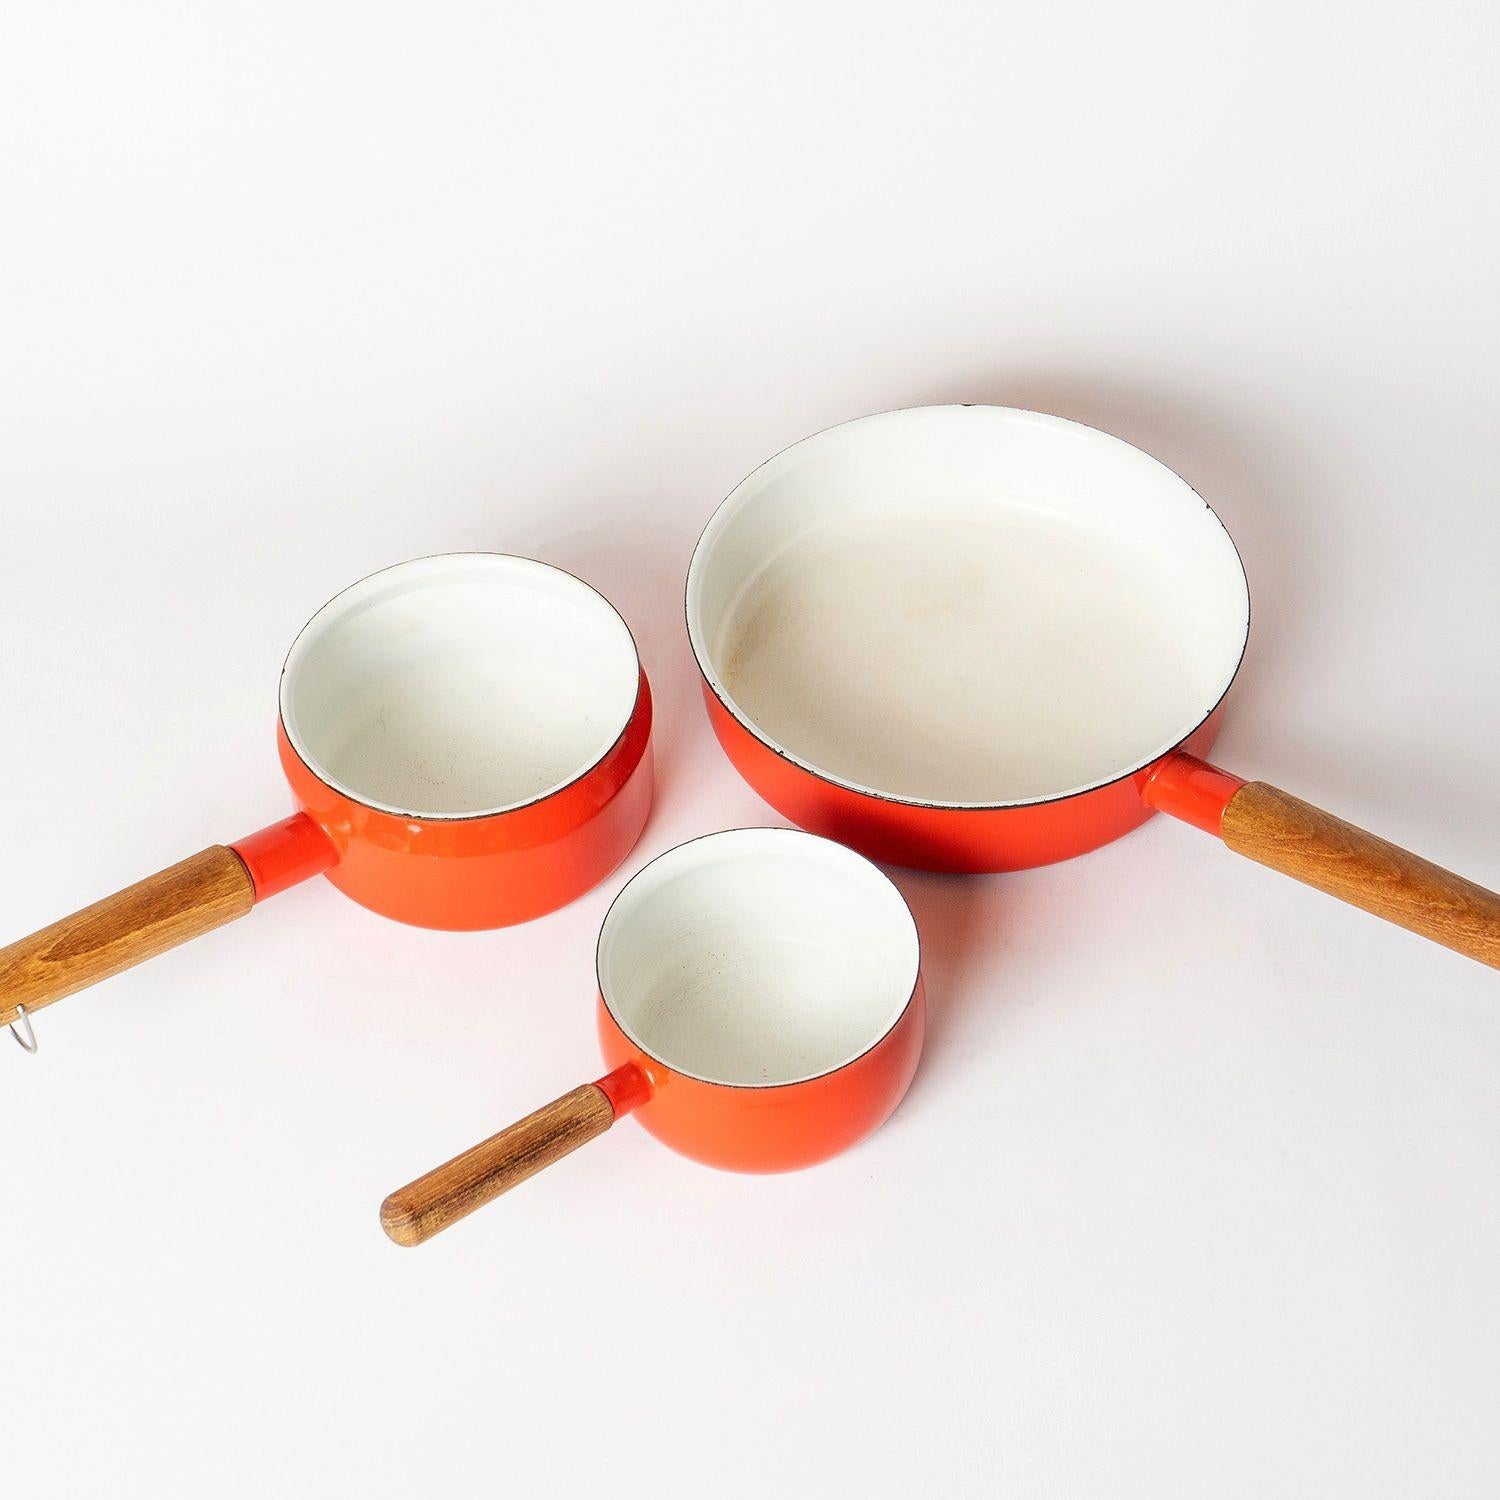 Finnish Set of Vintage Enamel Saucepans by Seppo Mallat for Finel Arabia Finland, 1960s For Sale